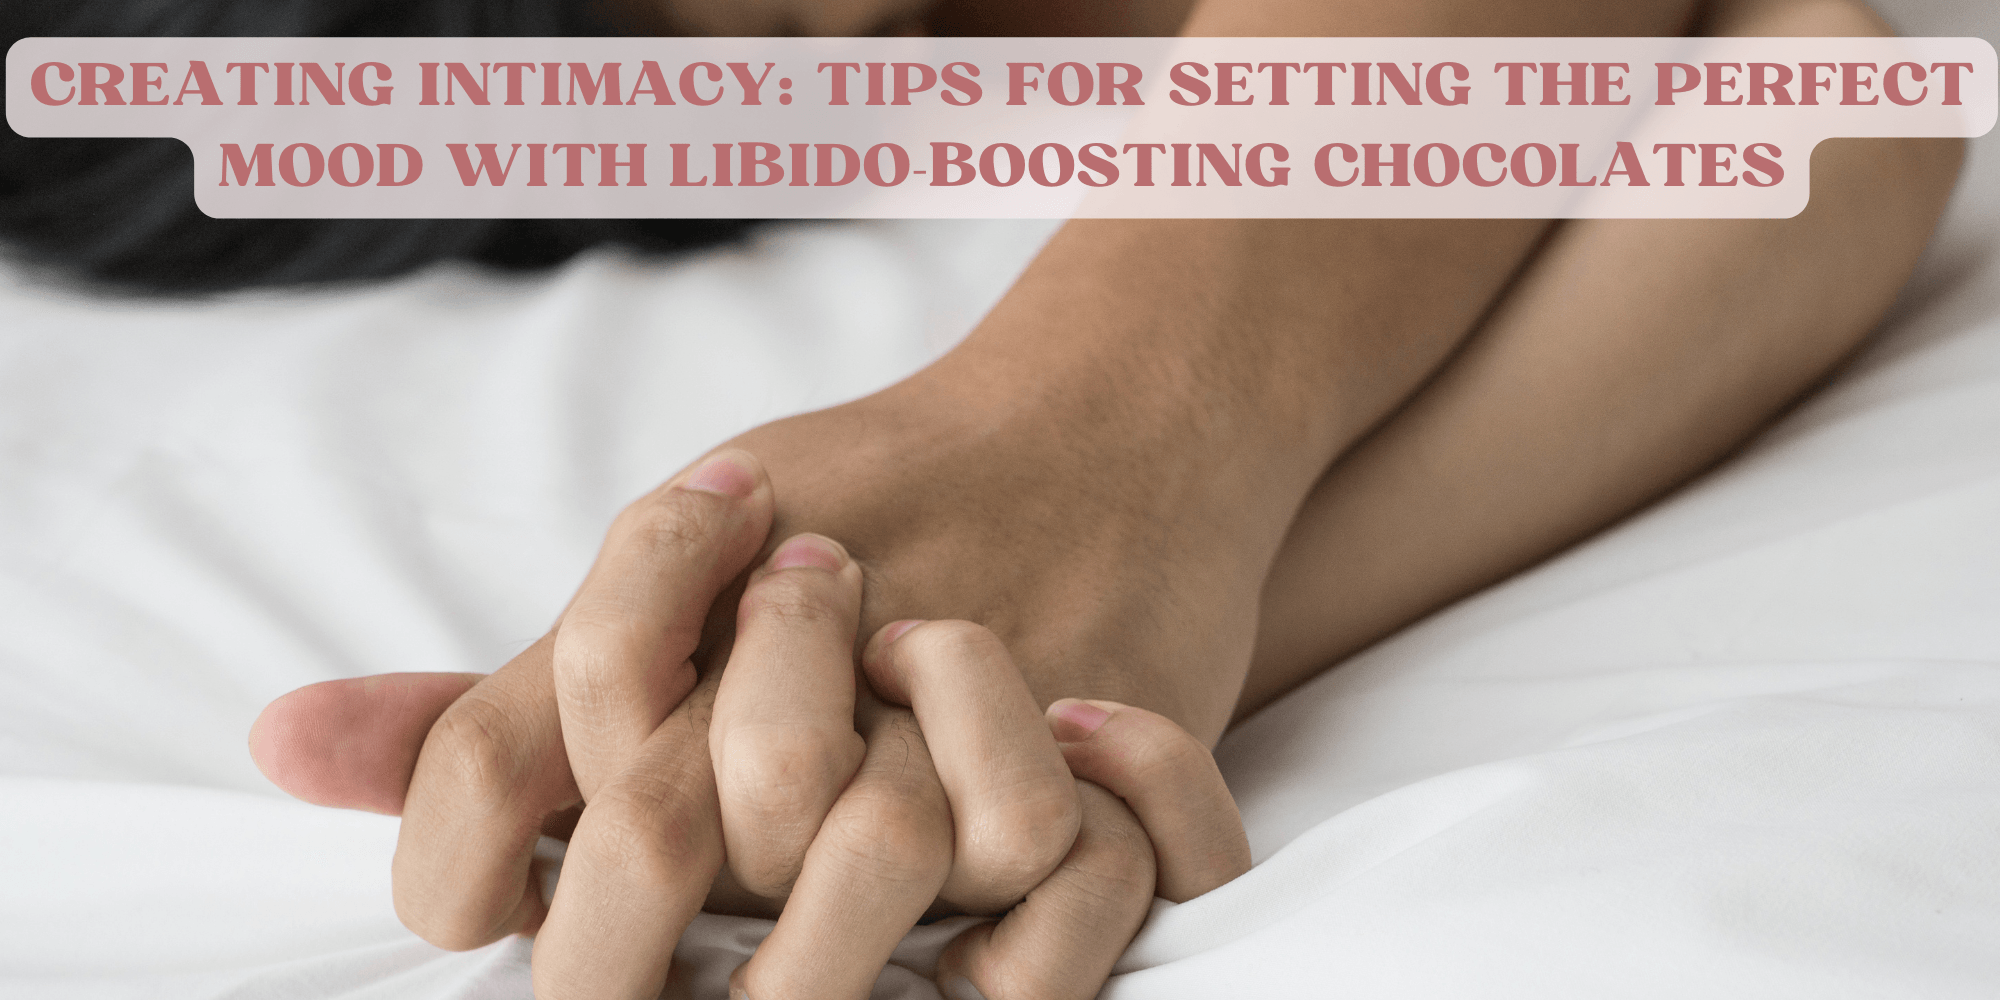 Tips for Setting the Perfect Mood with Libido-Boosting Chocolates - The Coco Love